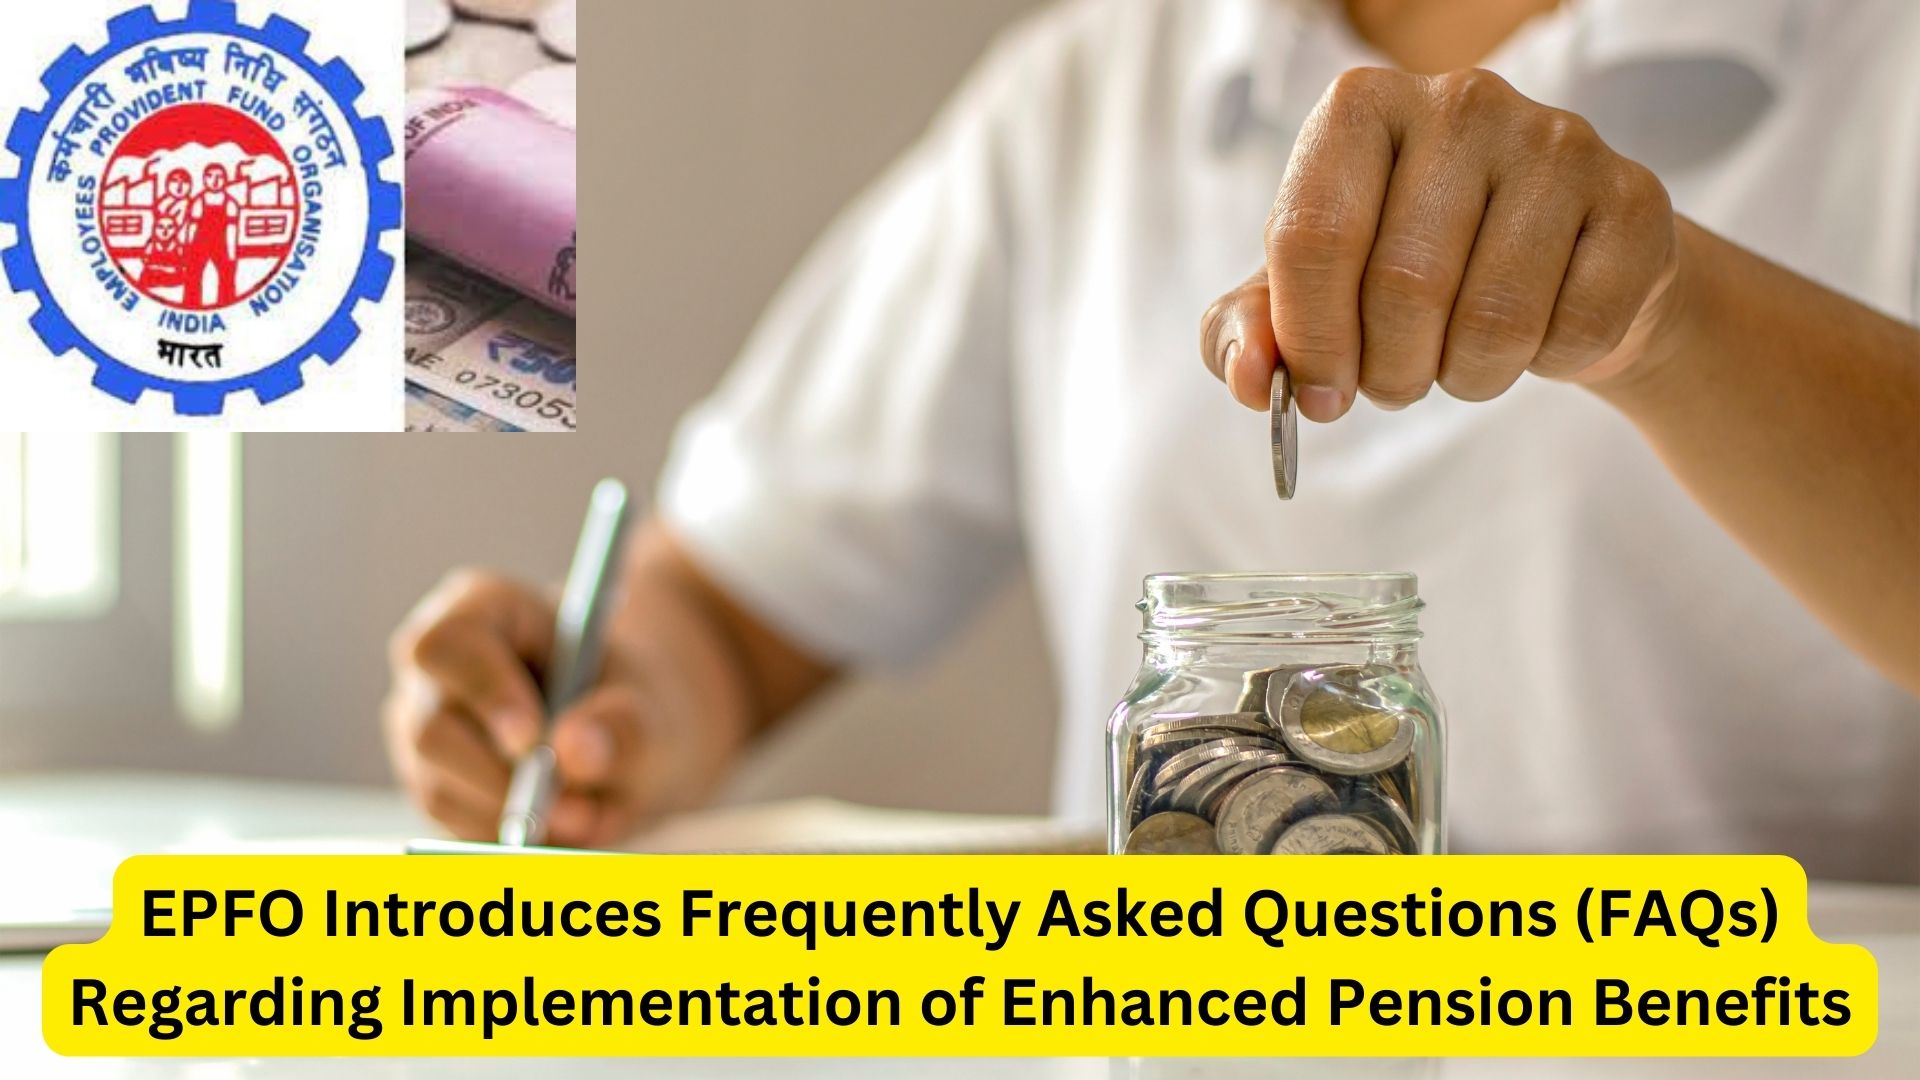 EPFO Introduces Frequently Asked Questions (FAQs) Regarding Implementation of Enhanced Pension Benefits